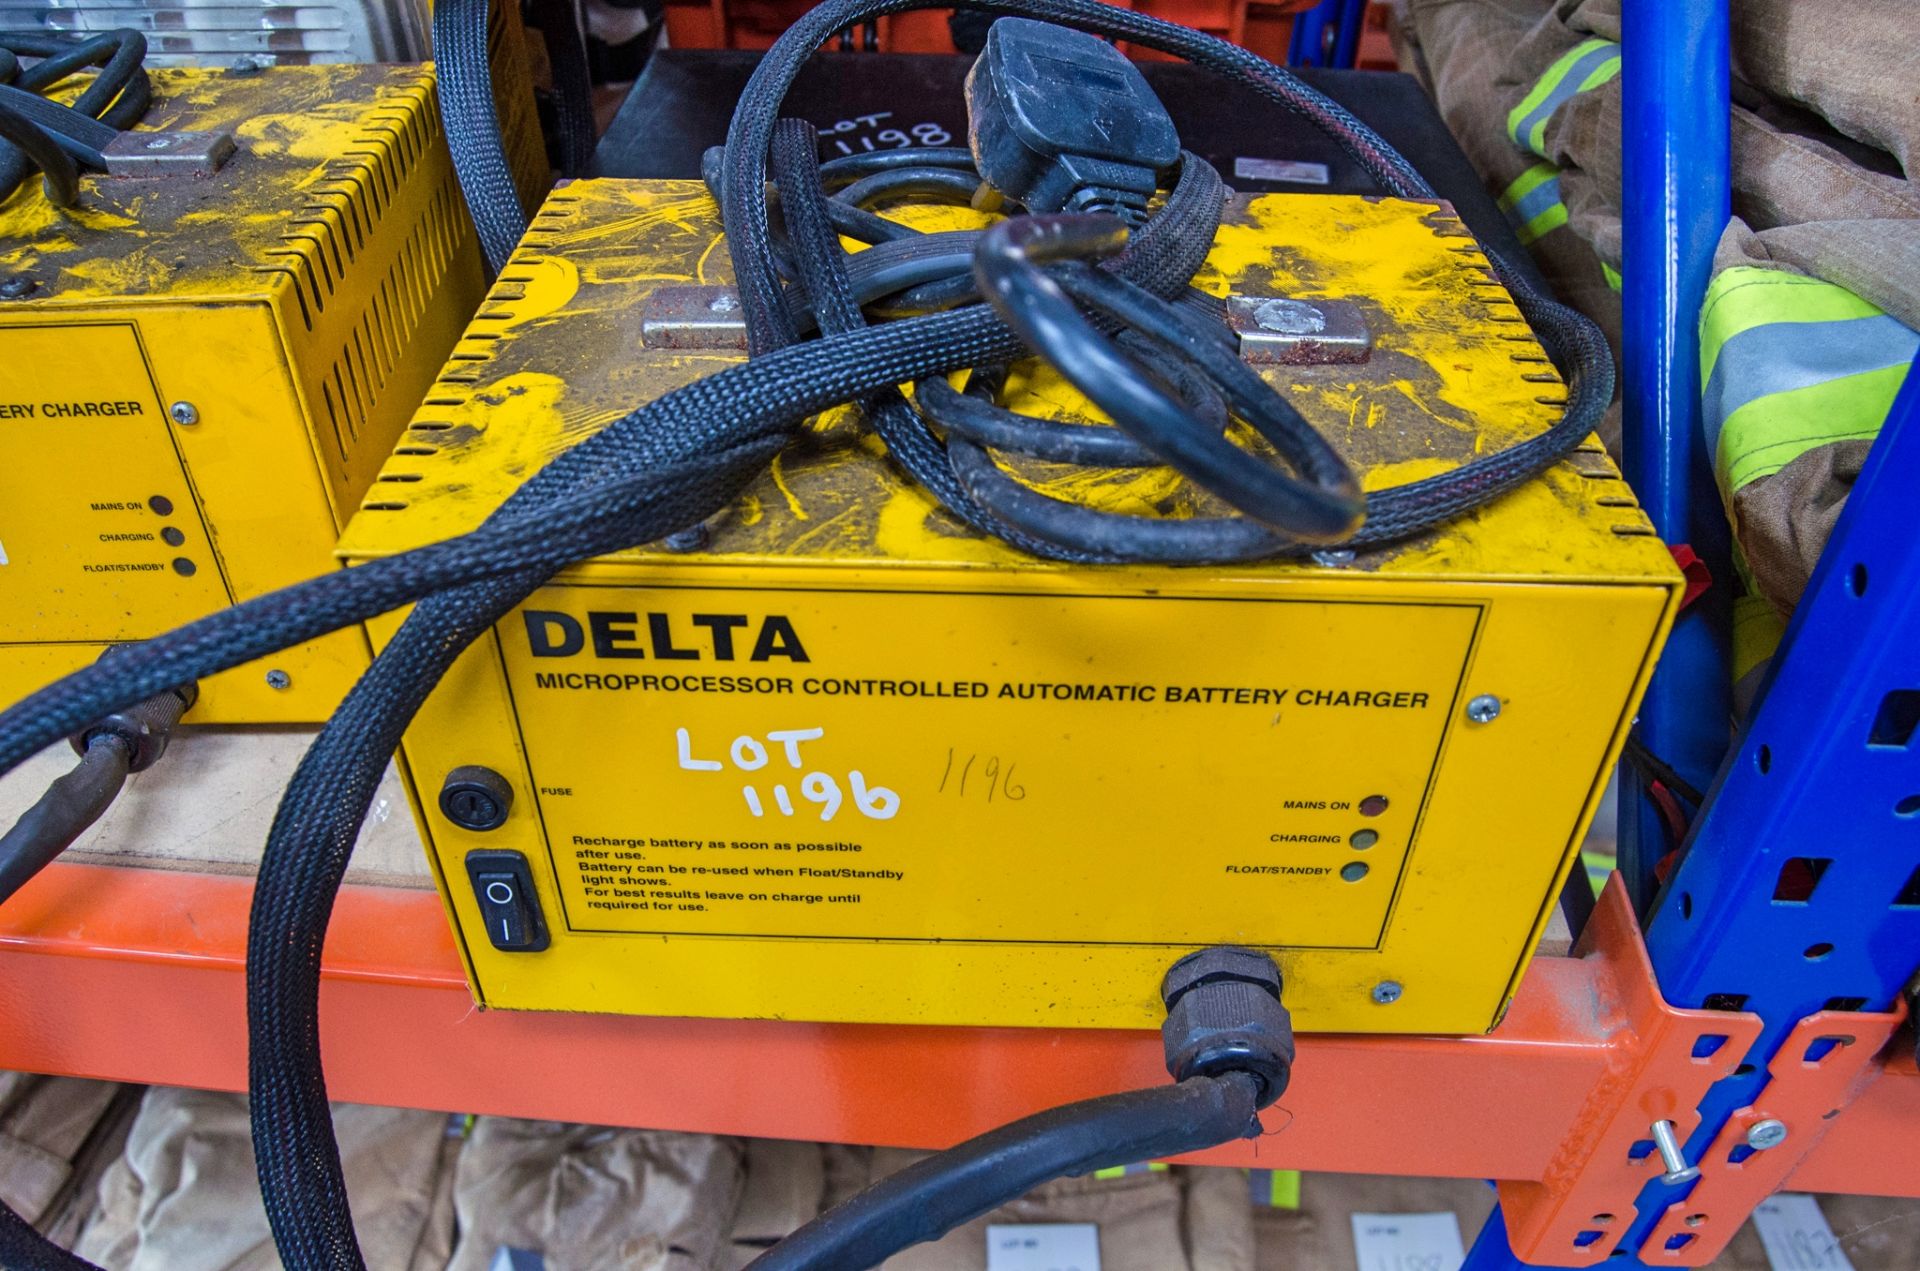 Delta microprocessor automatic battery charger Ex Fire Service